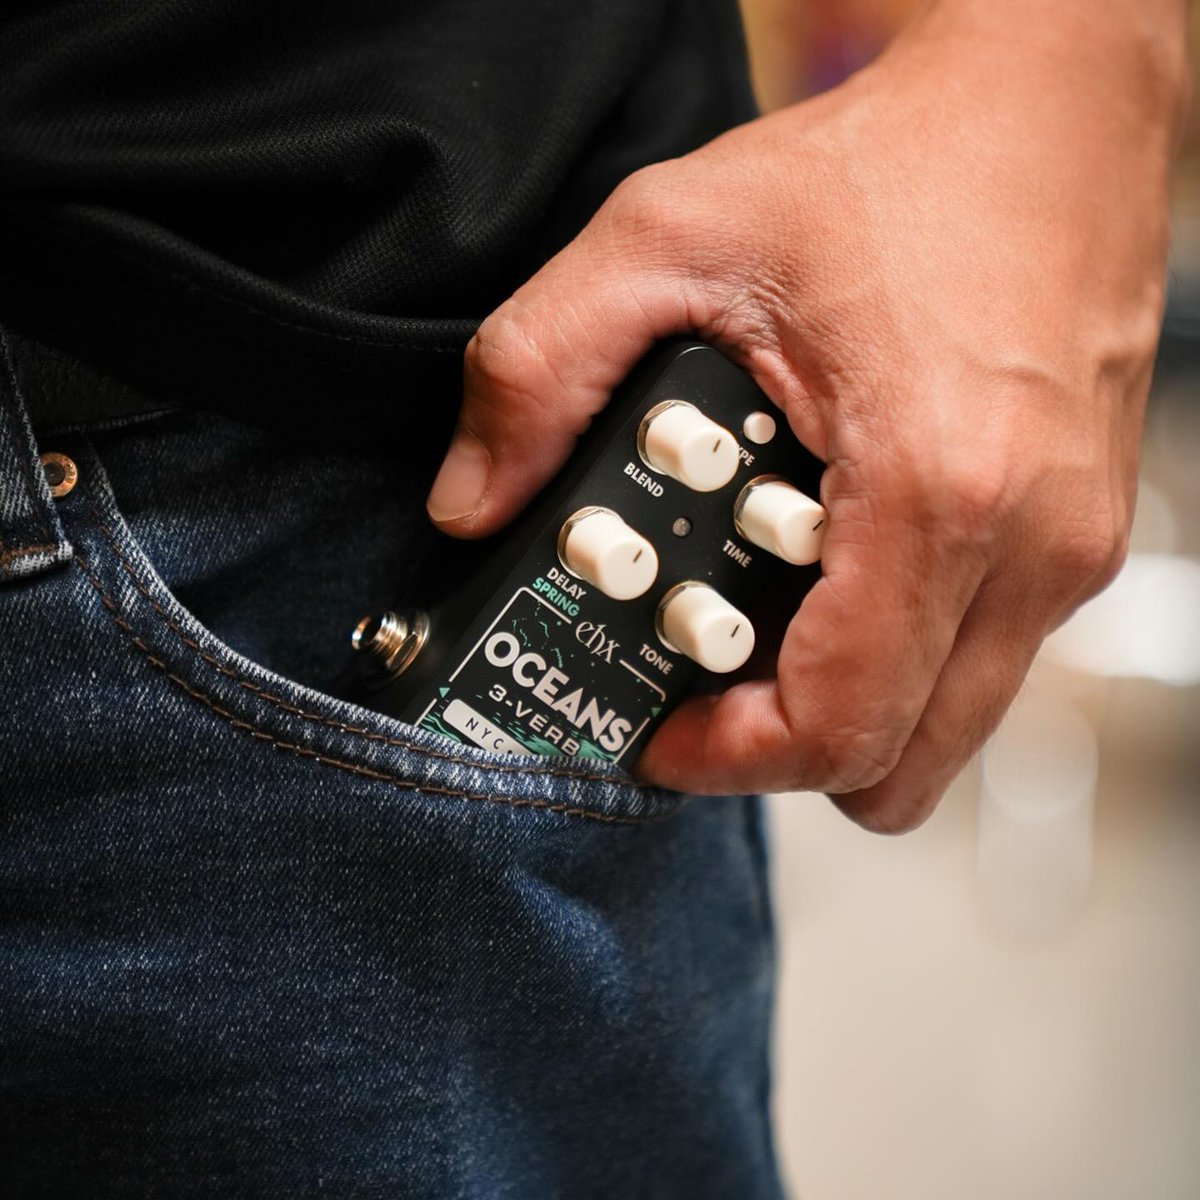 Potent pocket-sized pedals, the EHX NYC-DSP line of Picos are built for making amazing tone amazingly portable!
ehx.com/picos
📷 @melodyhousemi

#ehx #guitarpedals #guitargear #guitareffects #electroharmonix #pico #ehxpico #nycdsp